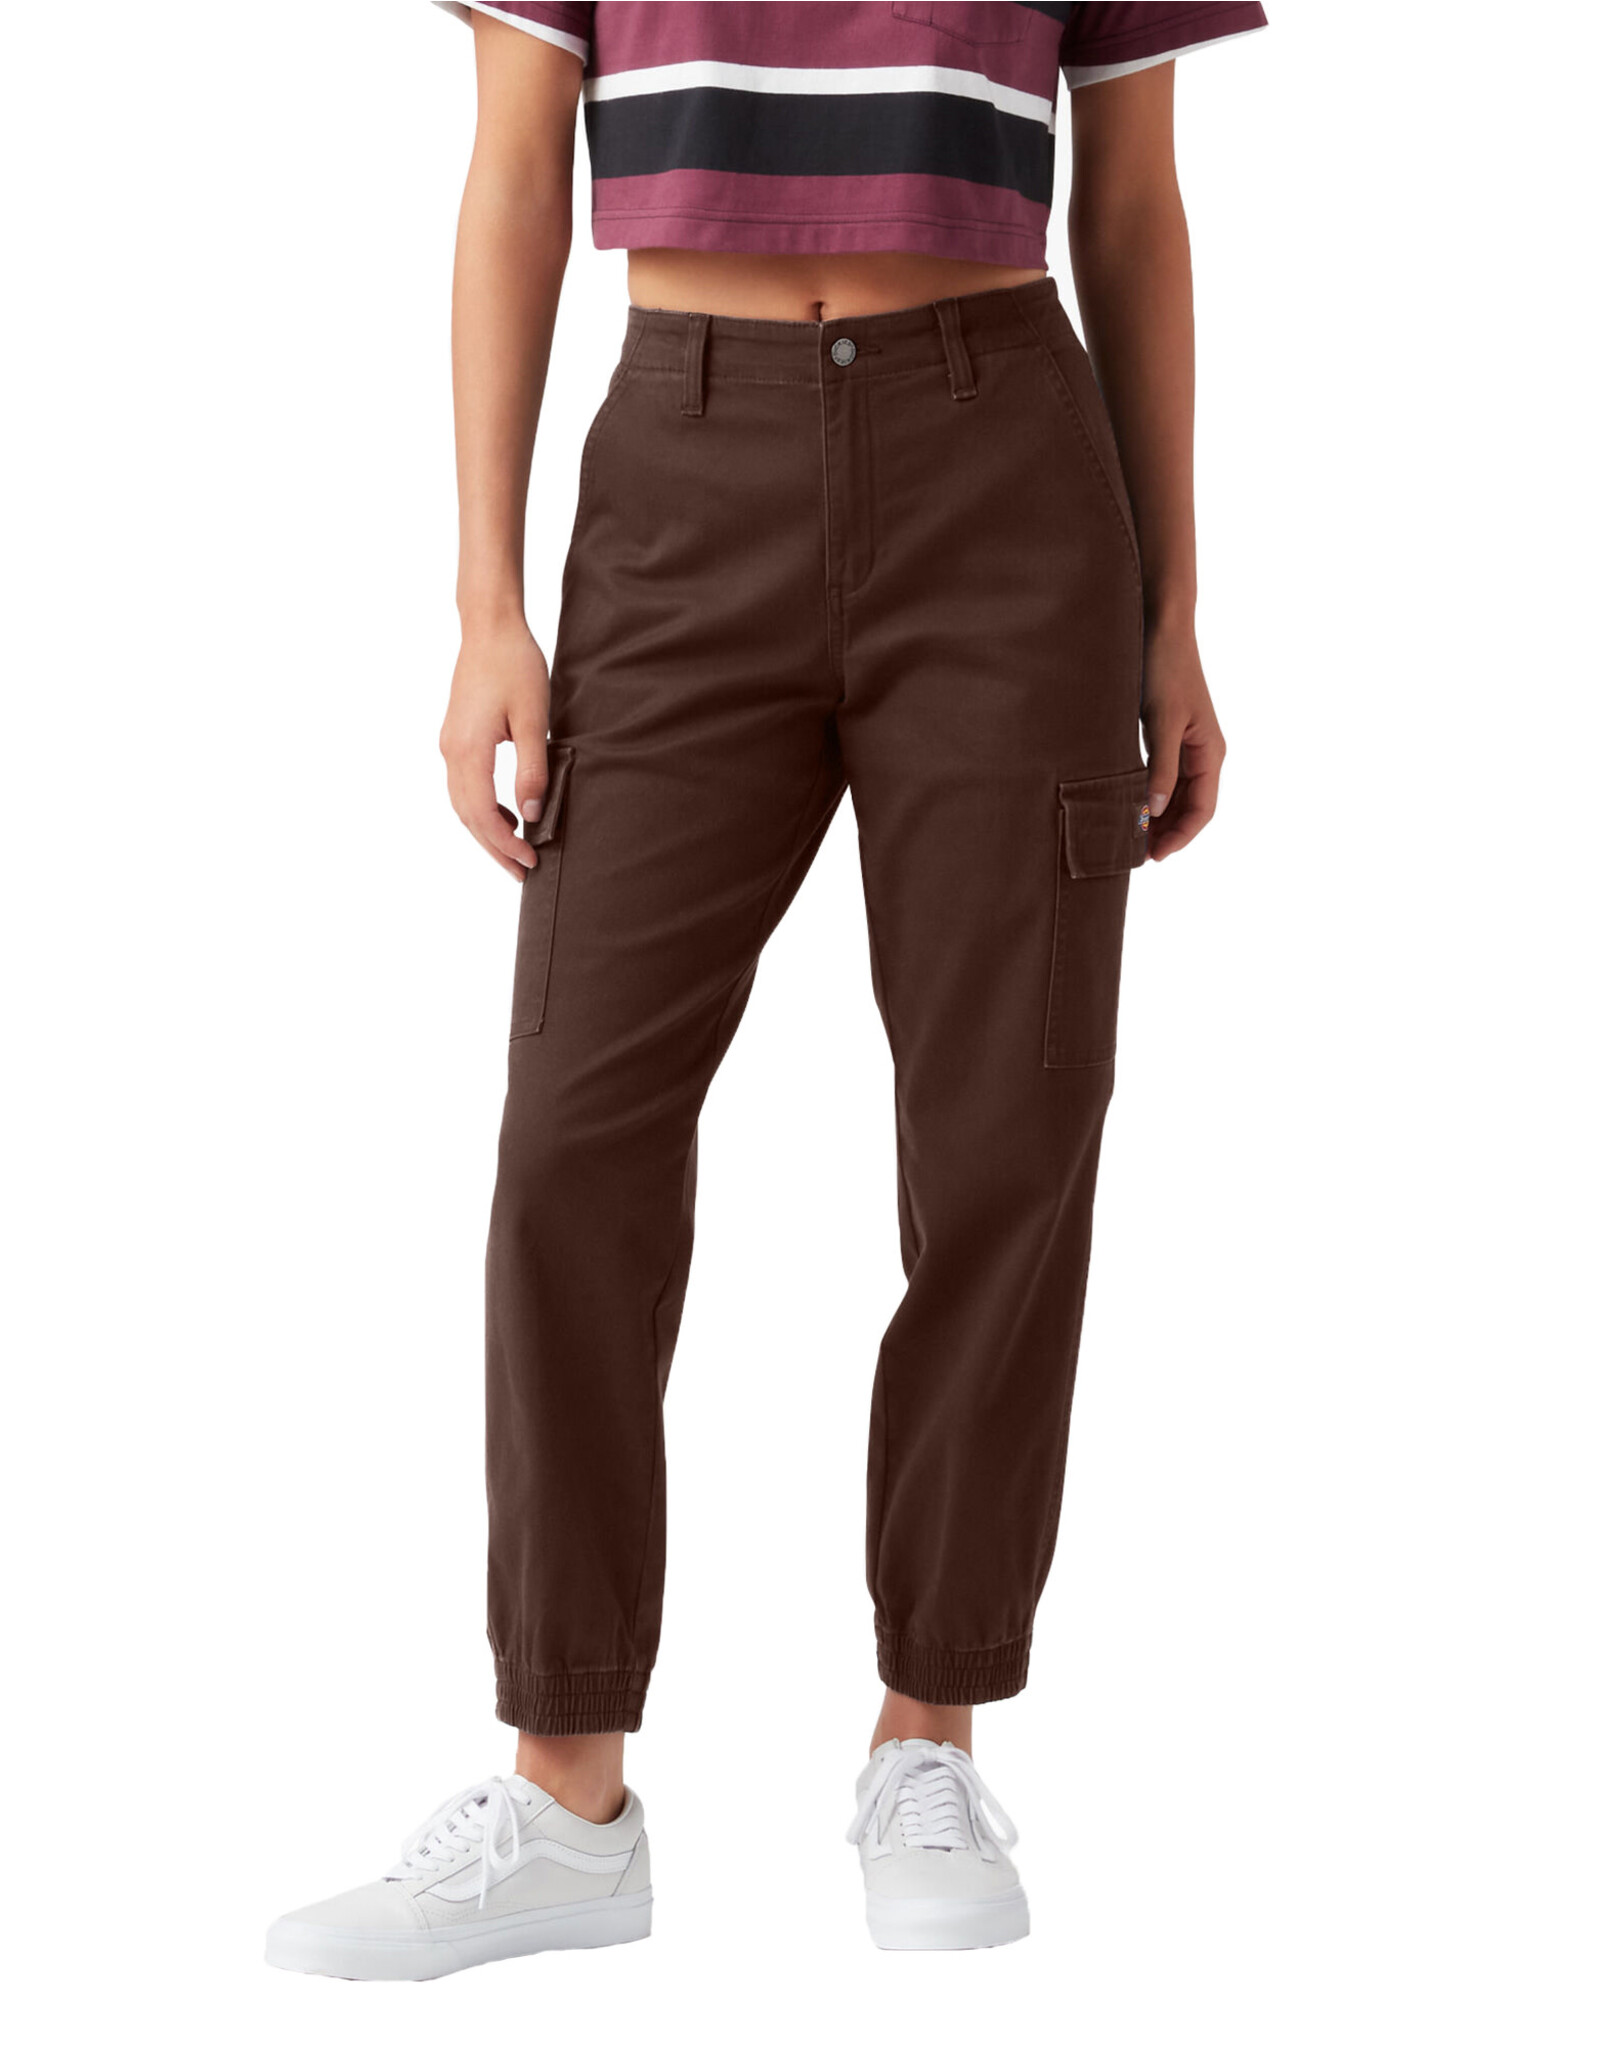 DICKIES Women's High Rise Fit Cargo Jogger Pants Chocolate Brown - FPR54CB